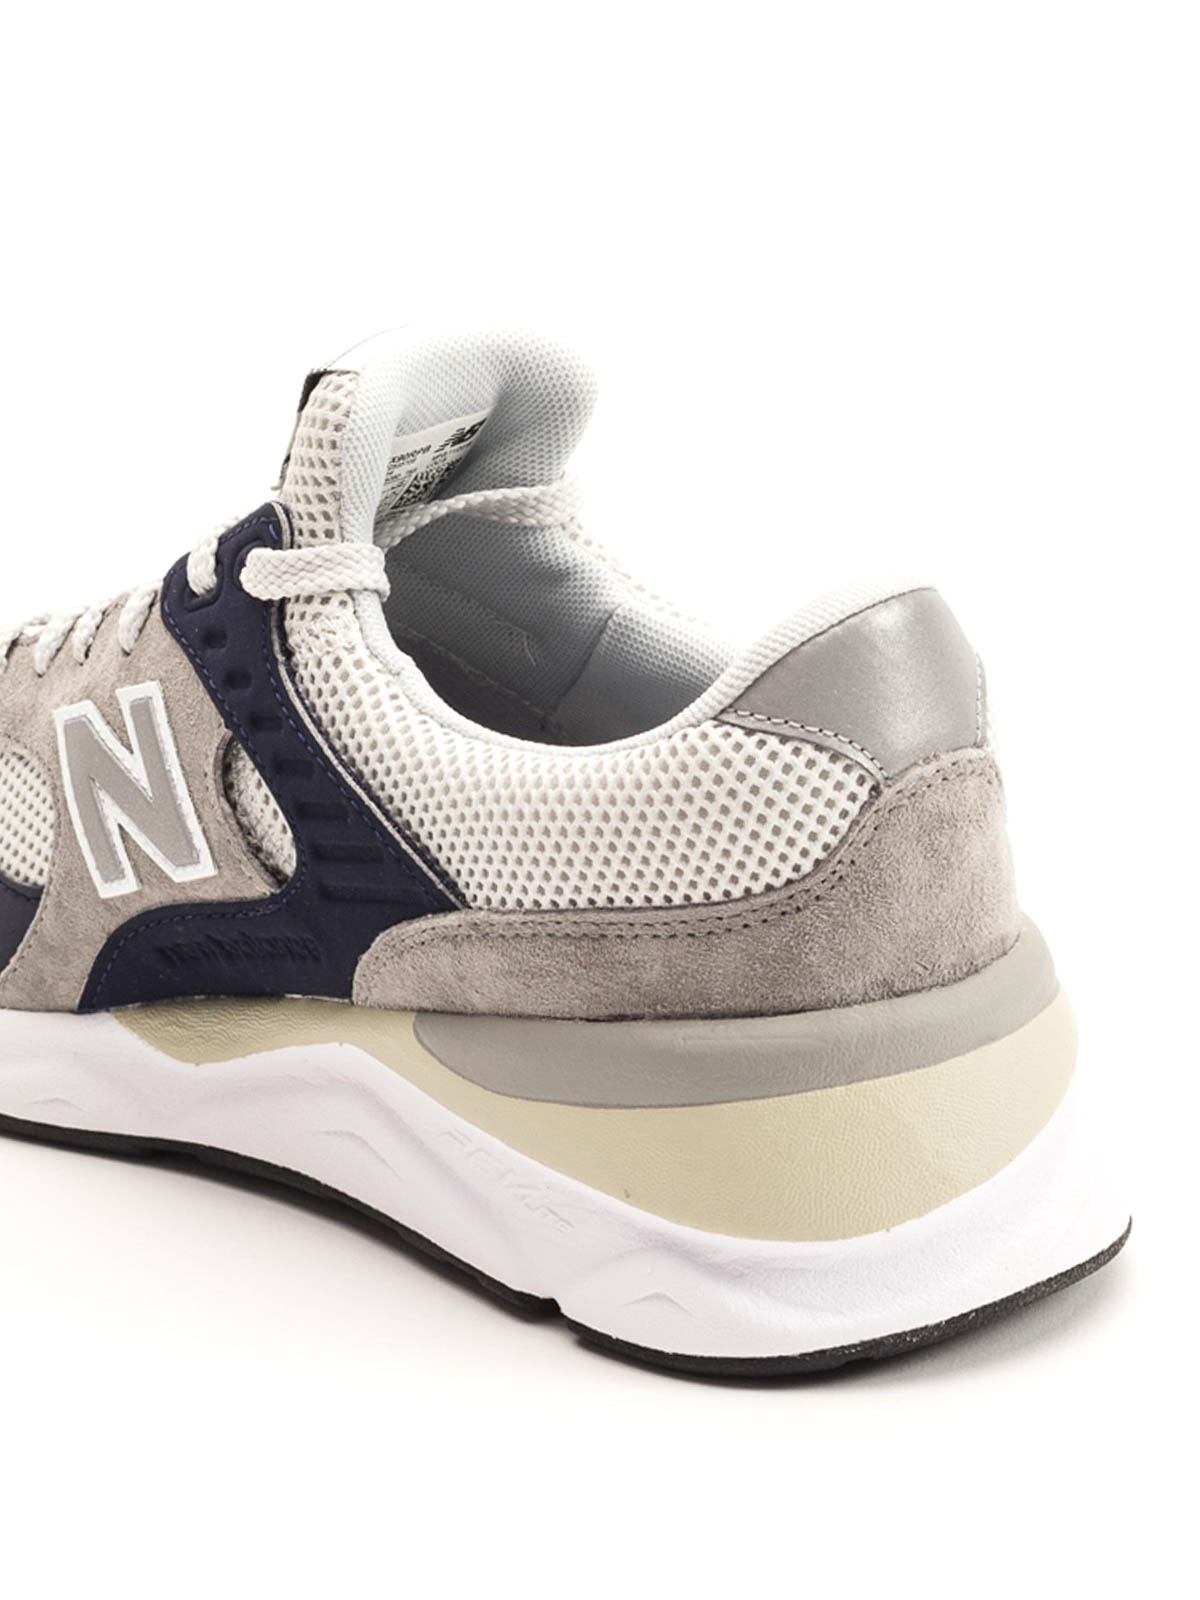 x90 reconstructed sneaker new balance